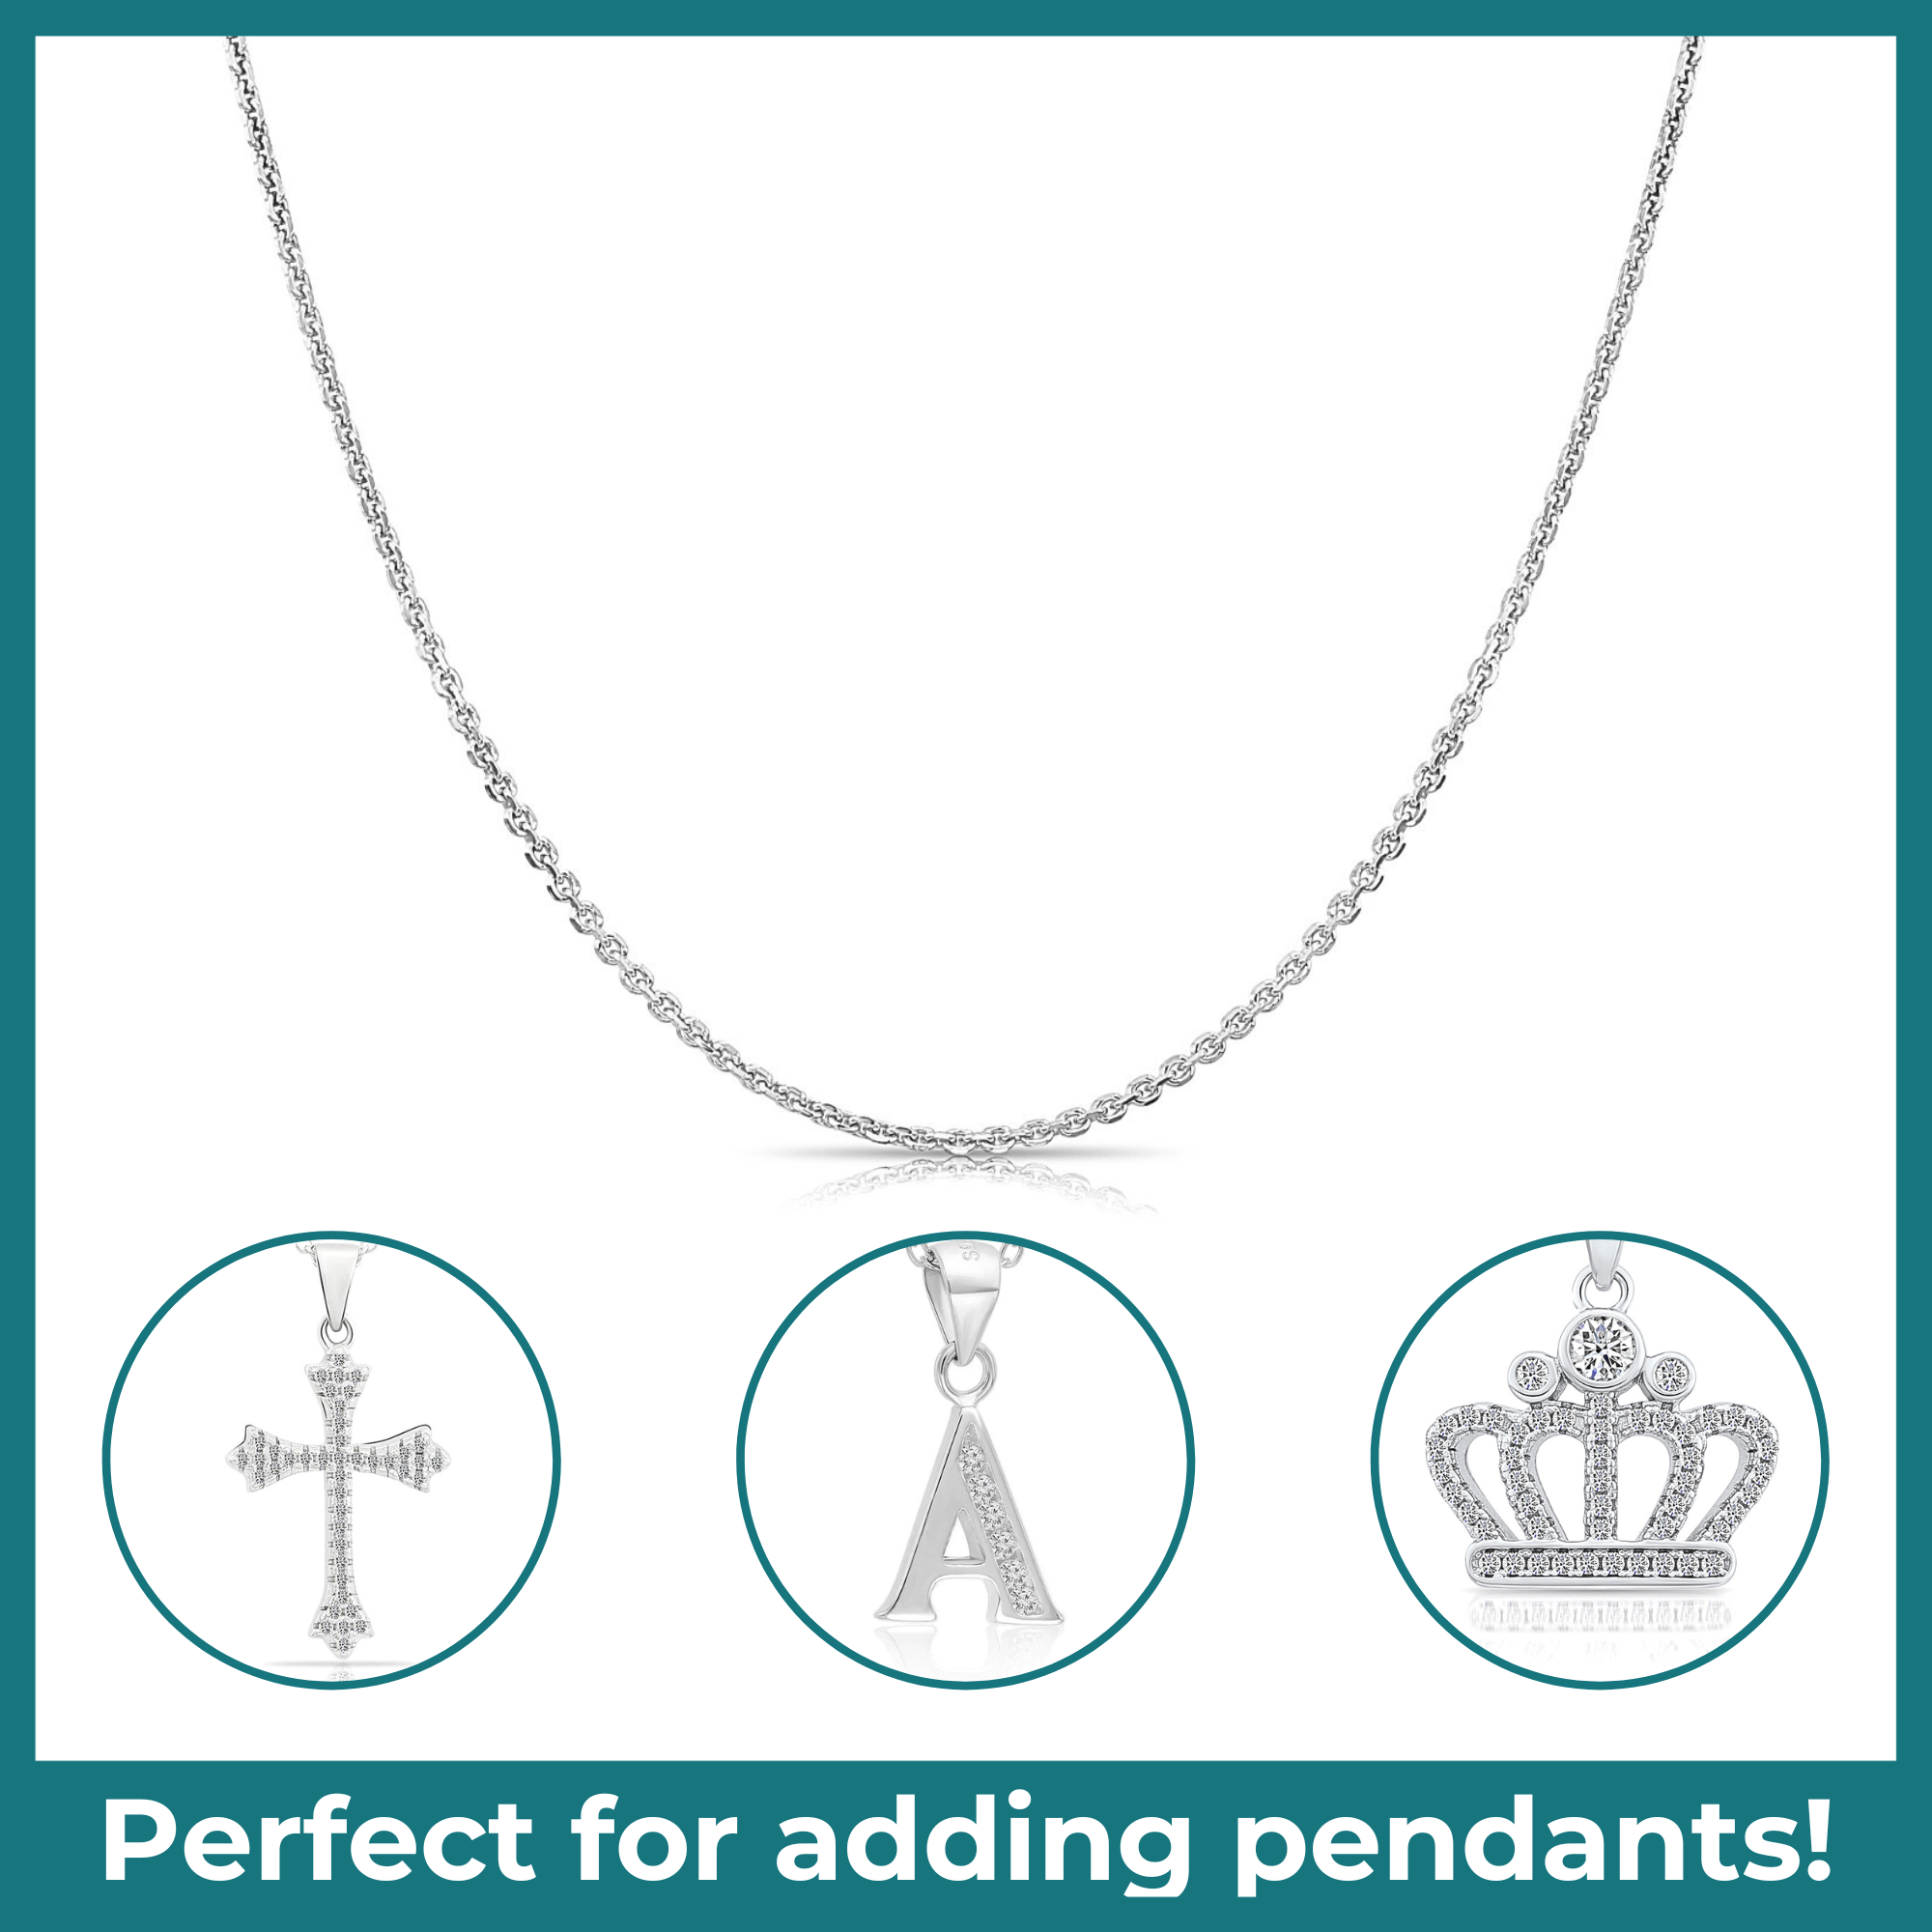 14K Solid White Gold Diamond-Cut Cable Chain Necklace 16 18 20inch, Thin and Dainty Cable Chain 1.5mm 18 Inches